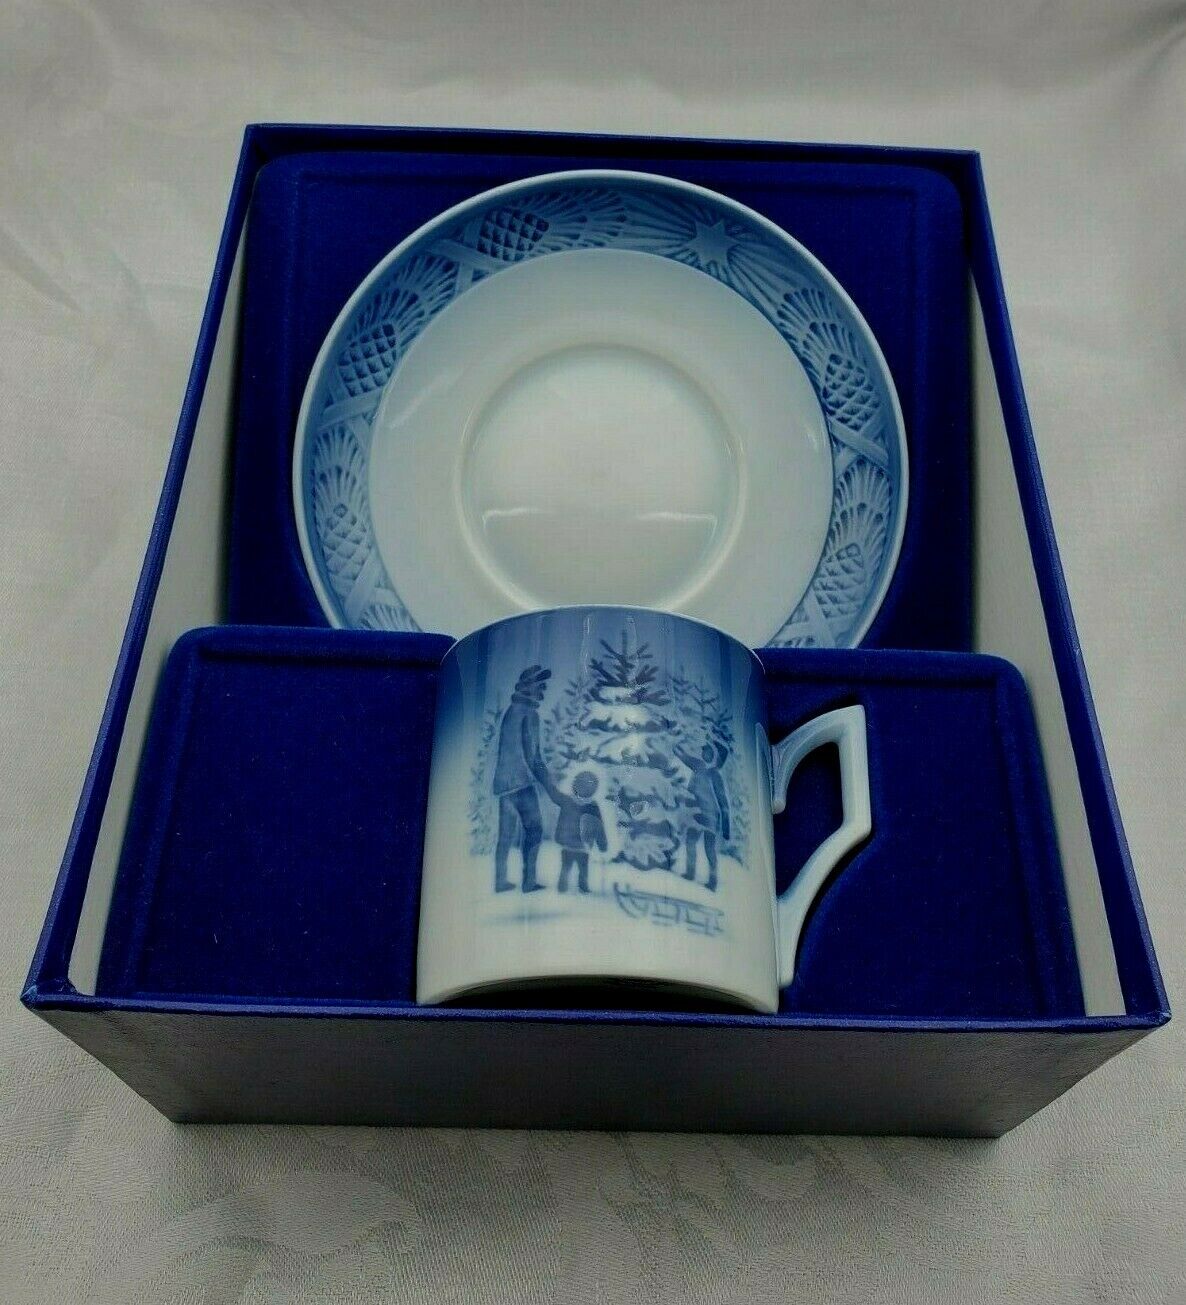 1979 Royal Copenhagen Cup and Saucer in Box - Choosing the Christmas Tree 10504